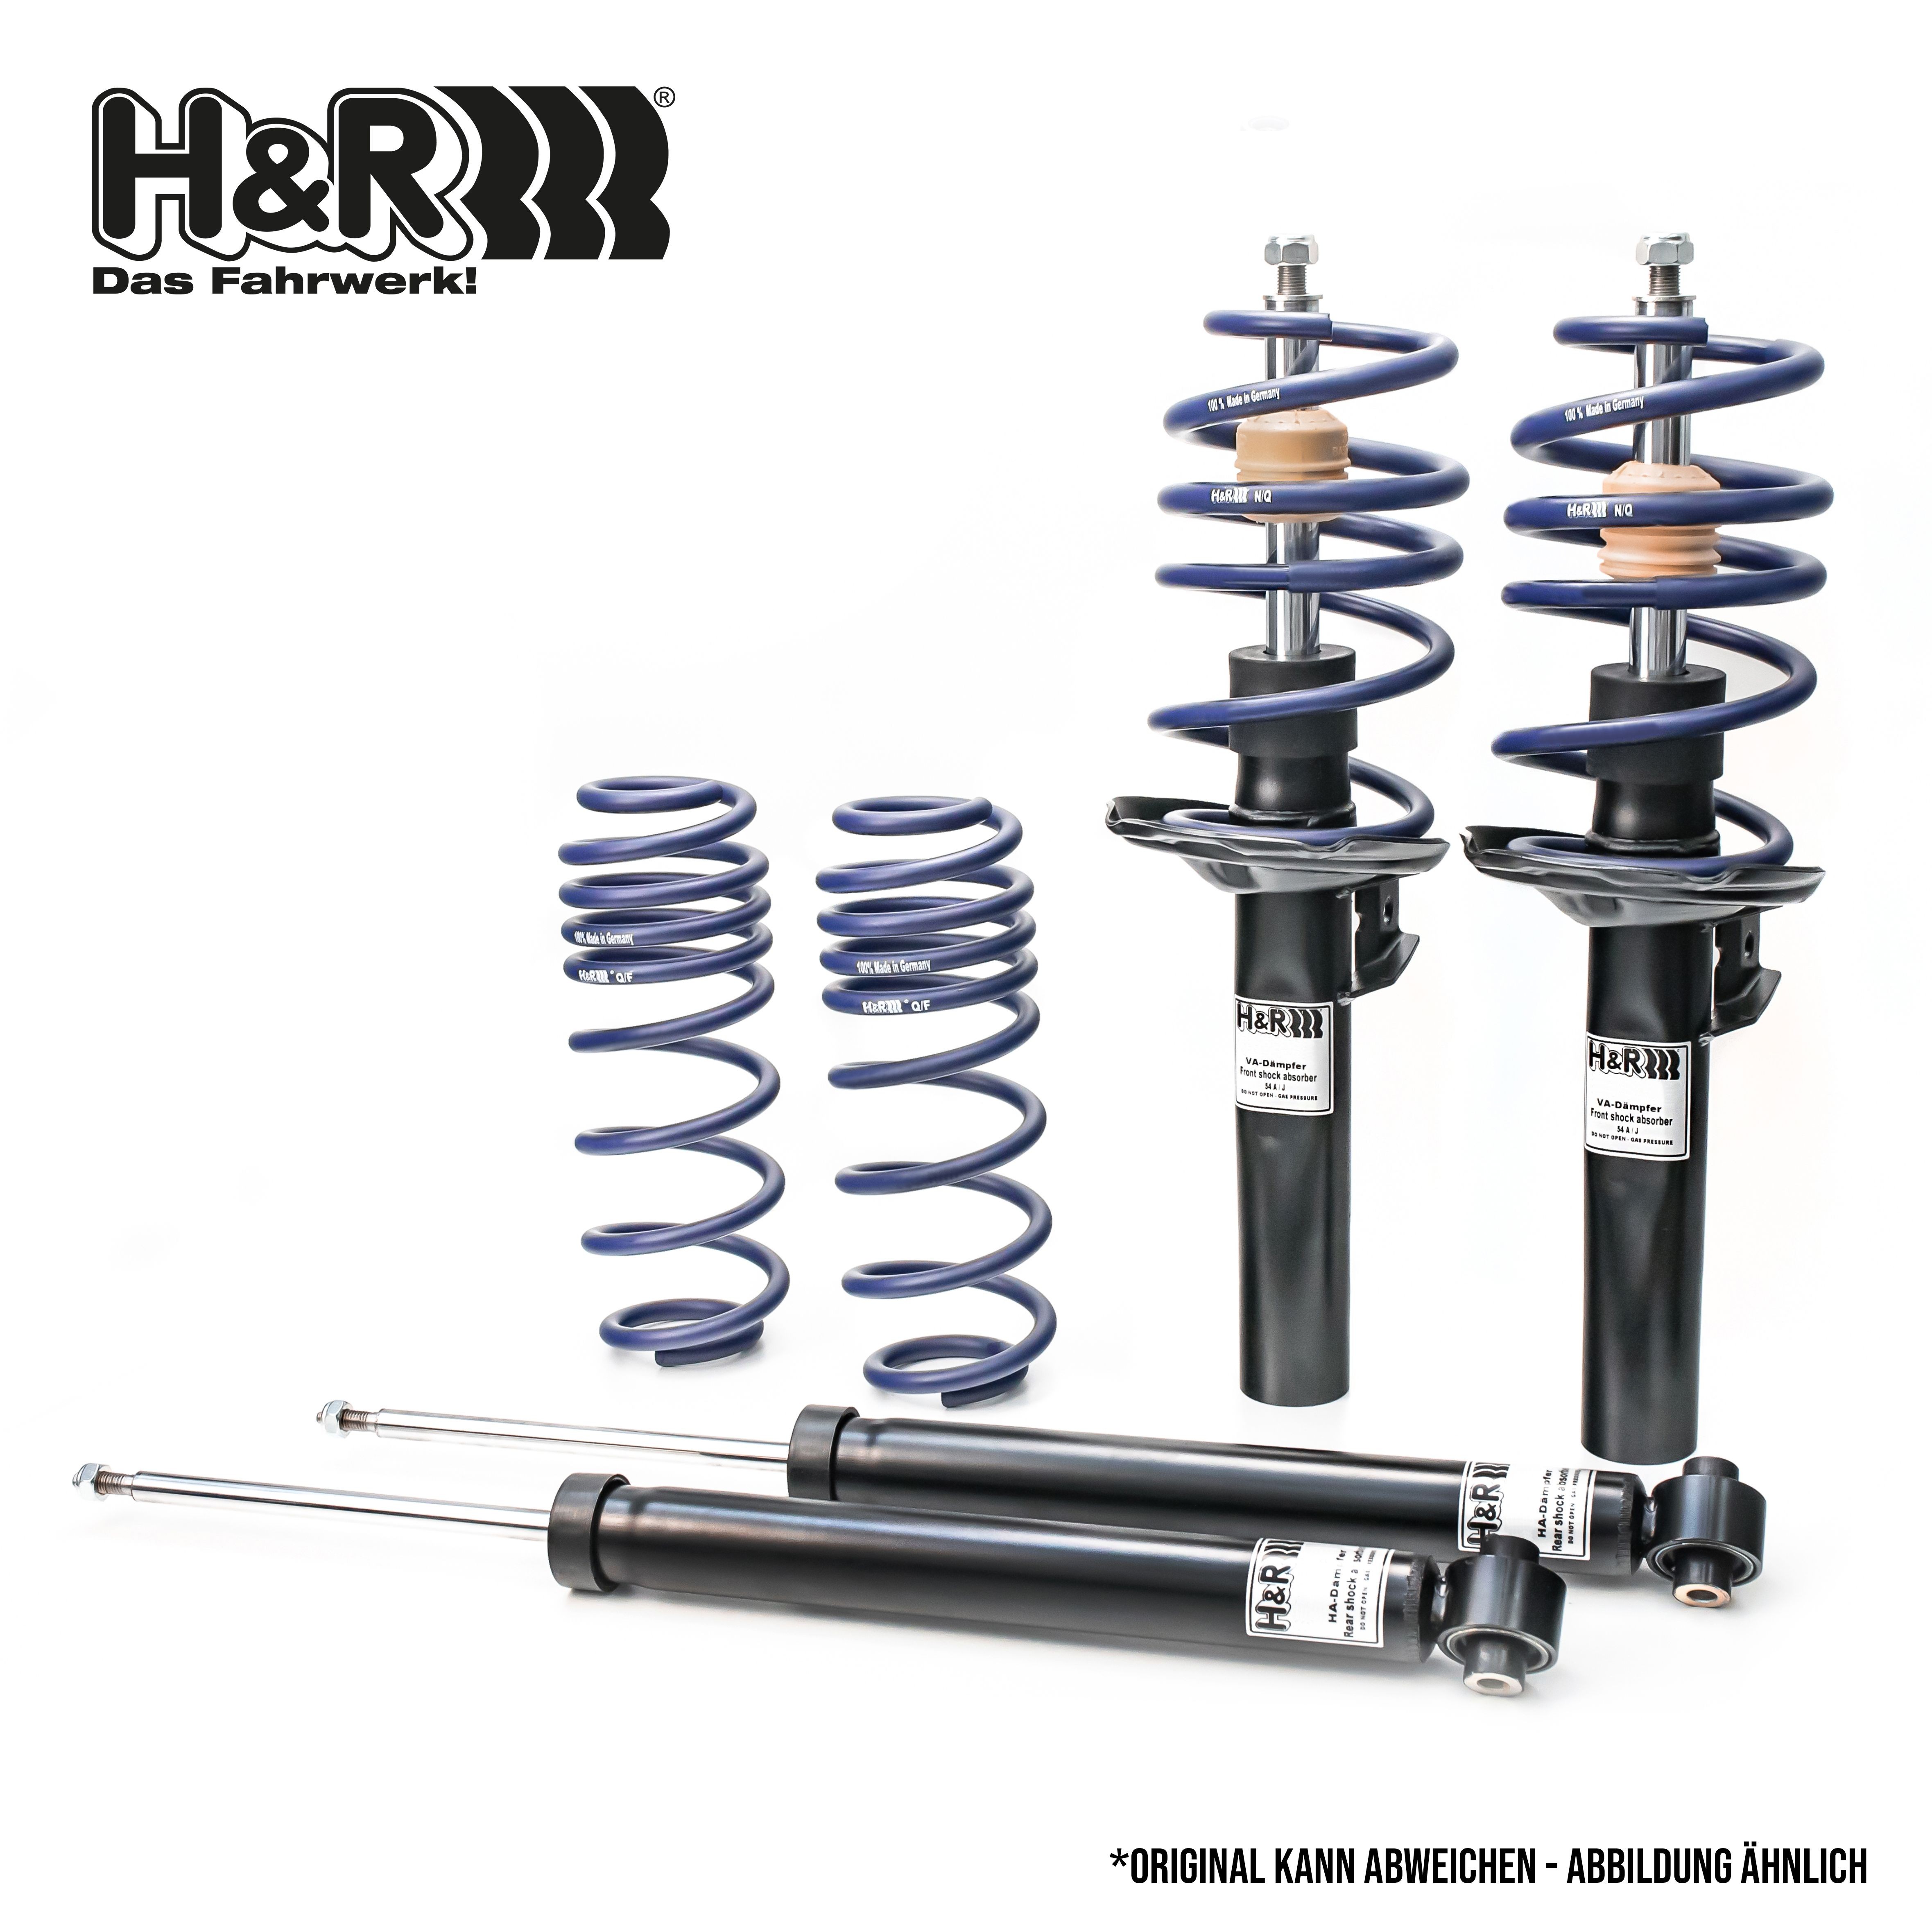 H&R 40724-1 Suspension kit, coil springs / shock absorbers MERCEDES-BENZ E-Class 2012 in original quality